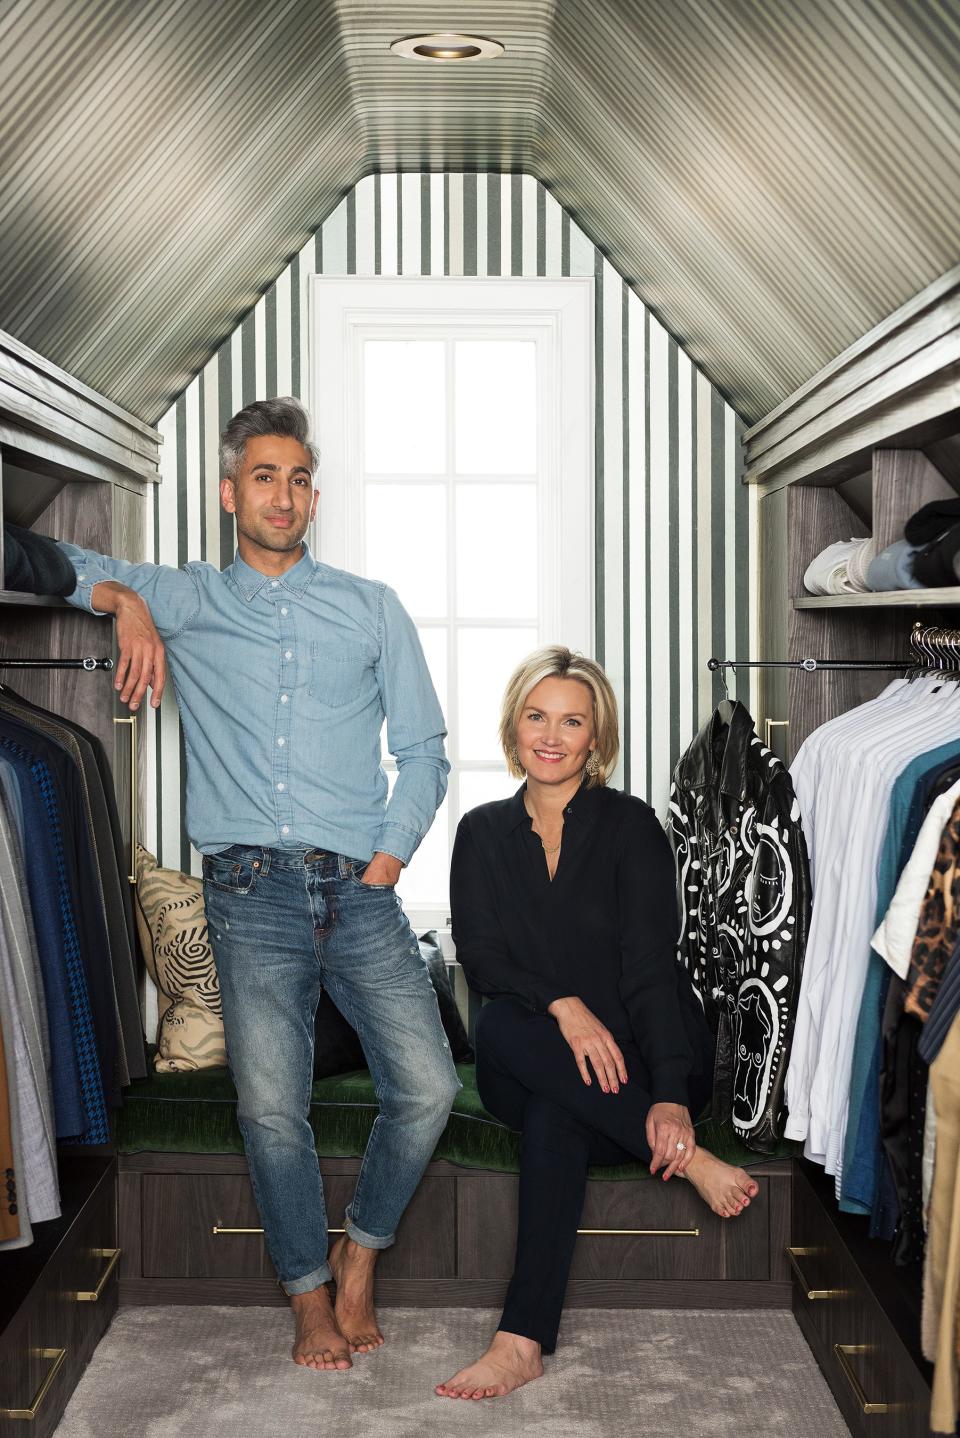 While he designed the rest of his home, France hired Jessica Bennett of Alice Lane Home to design his closet.